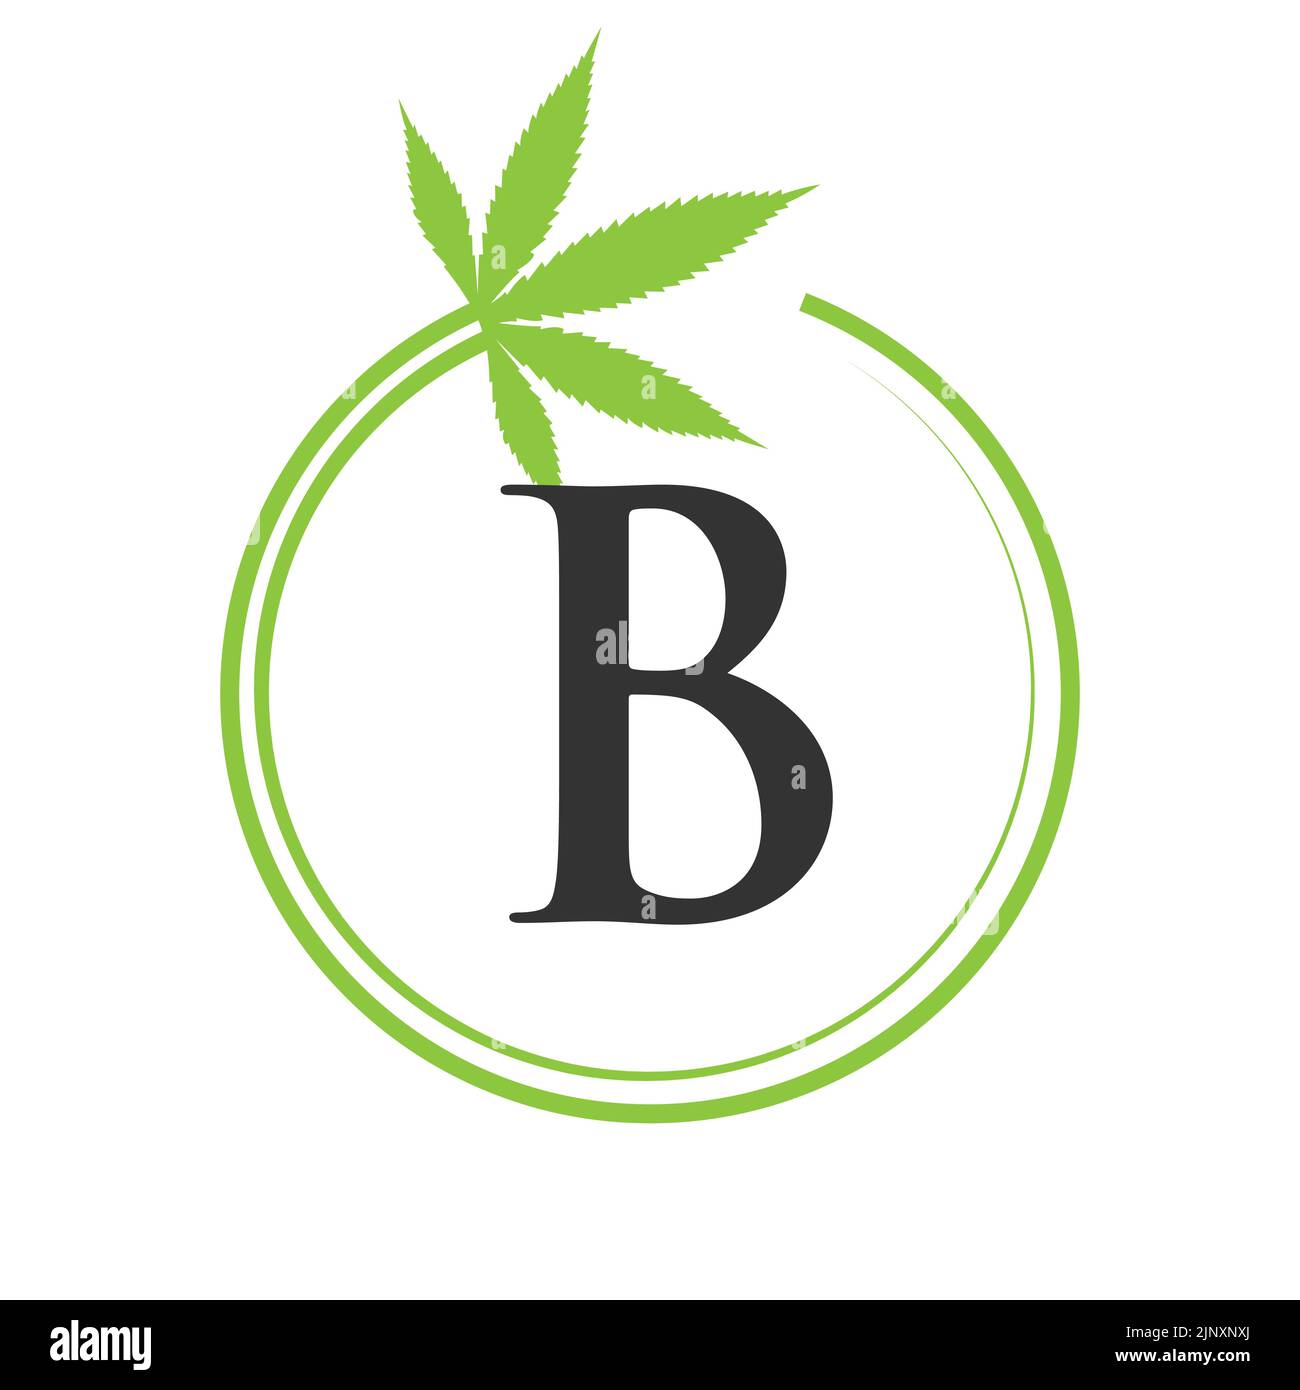 Cannabis Marijuana Logo on Letter B Concept For Health and Medical Therapy. Marijuana, Cannabis Sign Template Stock Vector